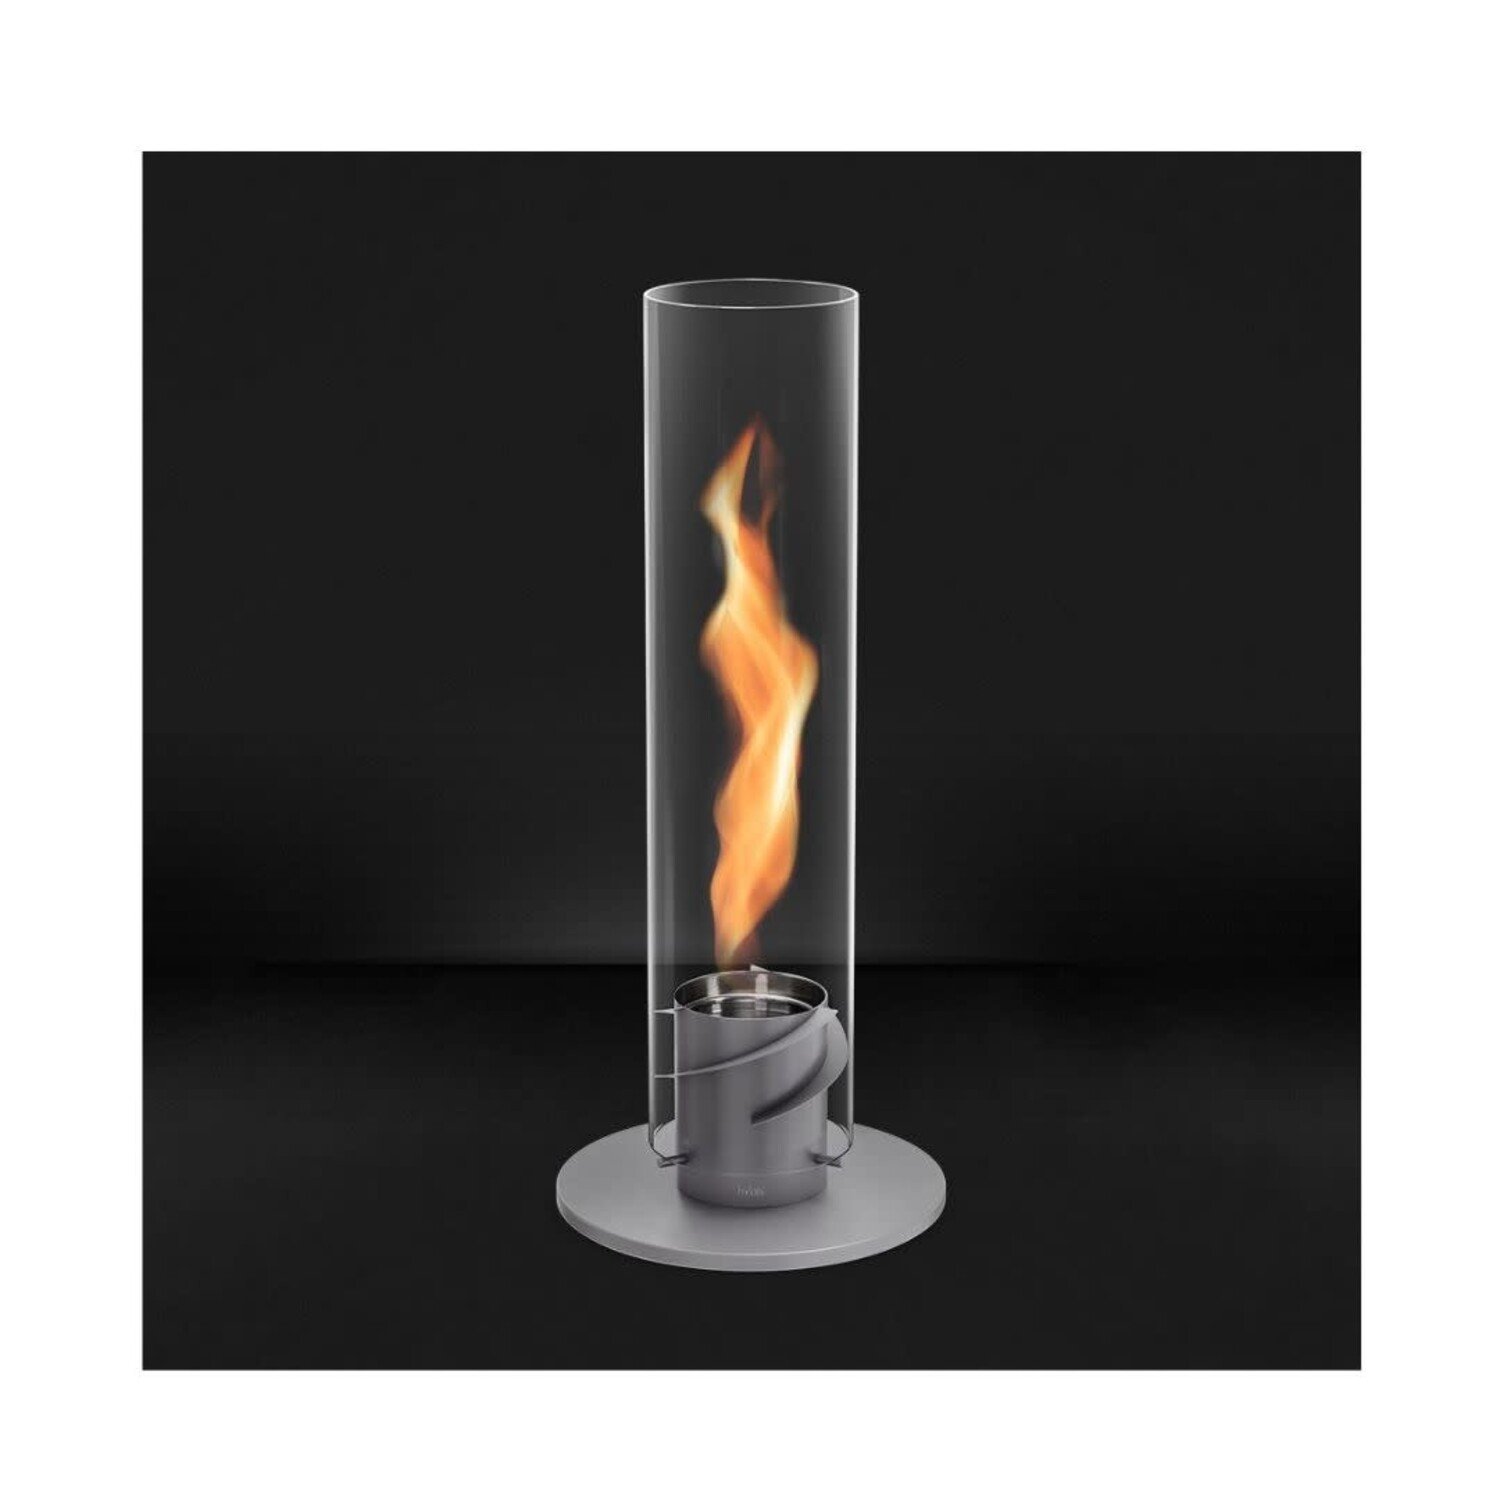 Rent Hofats SPIN 120 Table Fire in Silver for Parties and Events